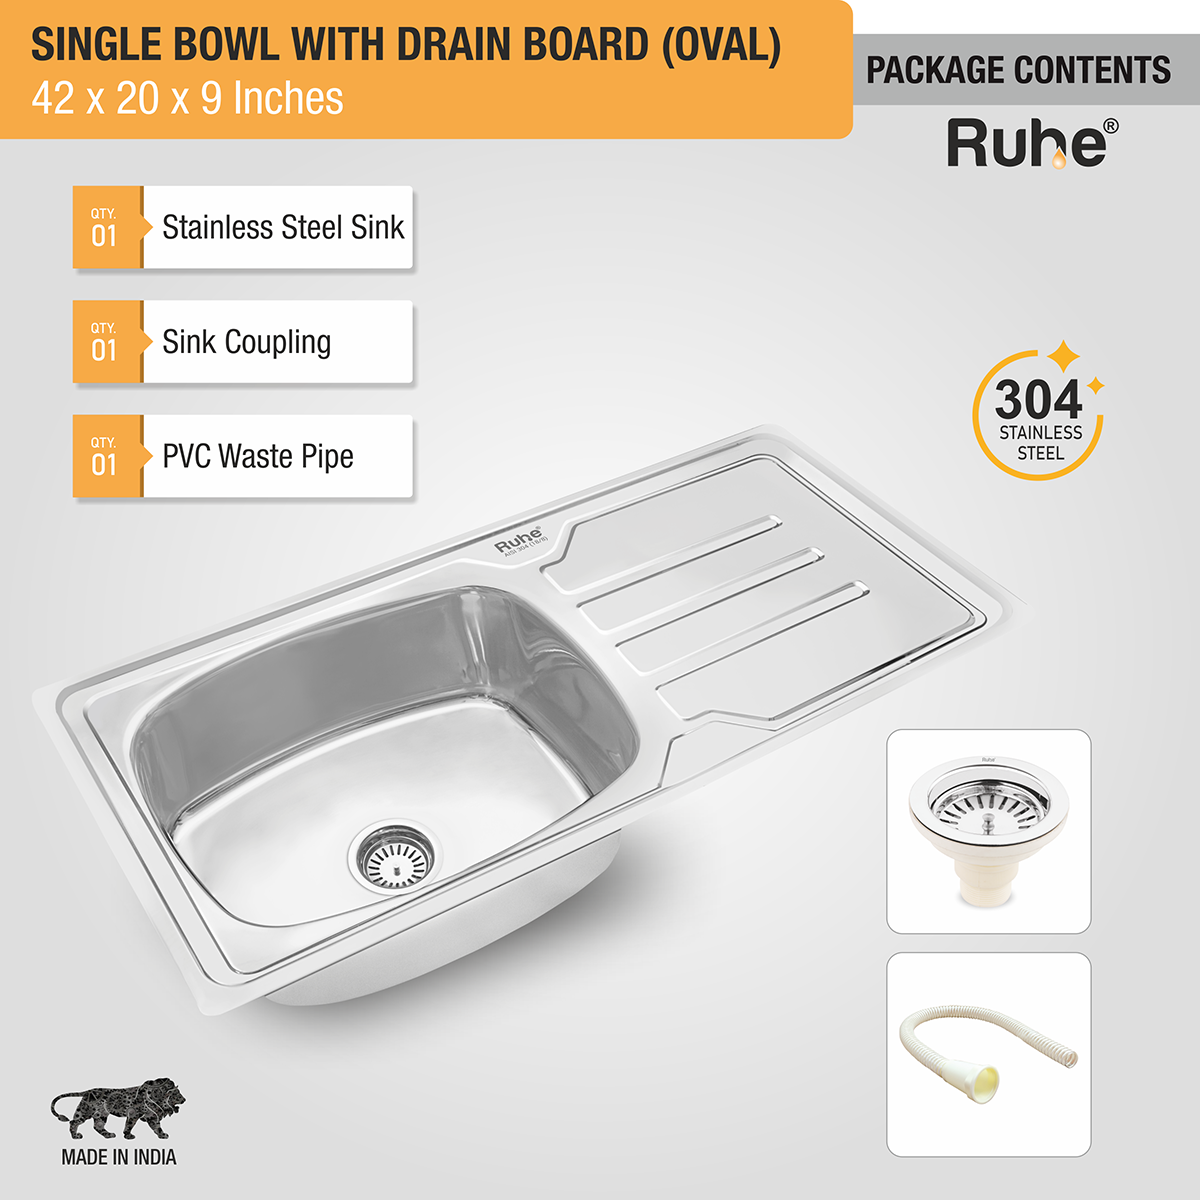 Oval Single Bowl (42 x 20 x 9 inches) 304-Grade Stainless Steel Kitchen Sink with Drainboard with waste coupling, waste pipe